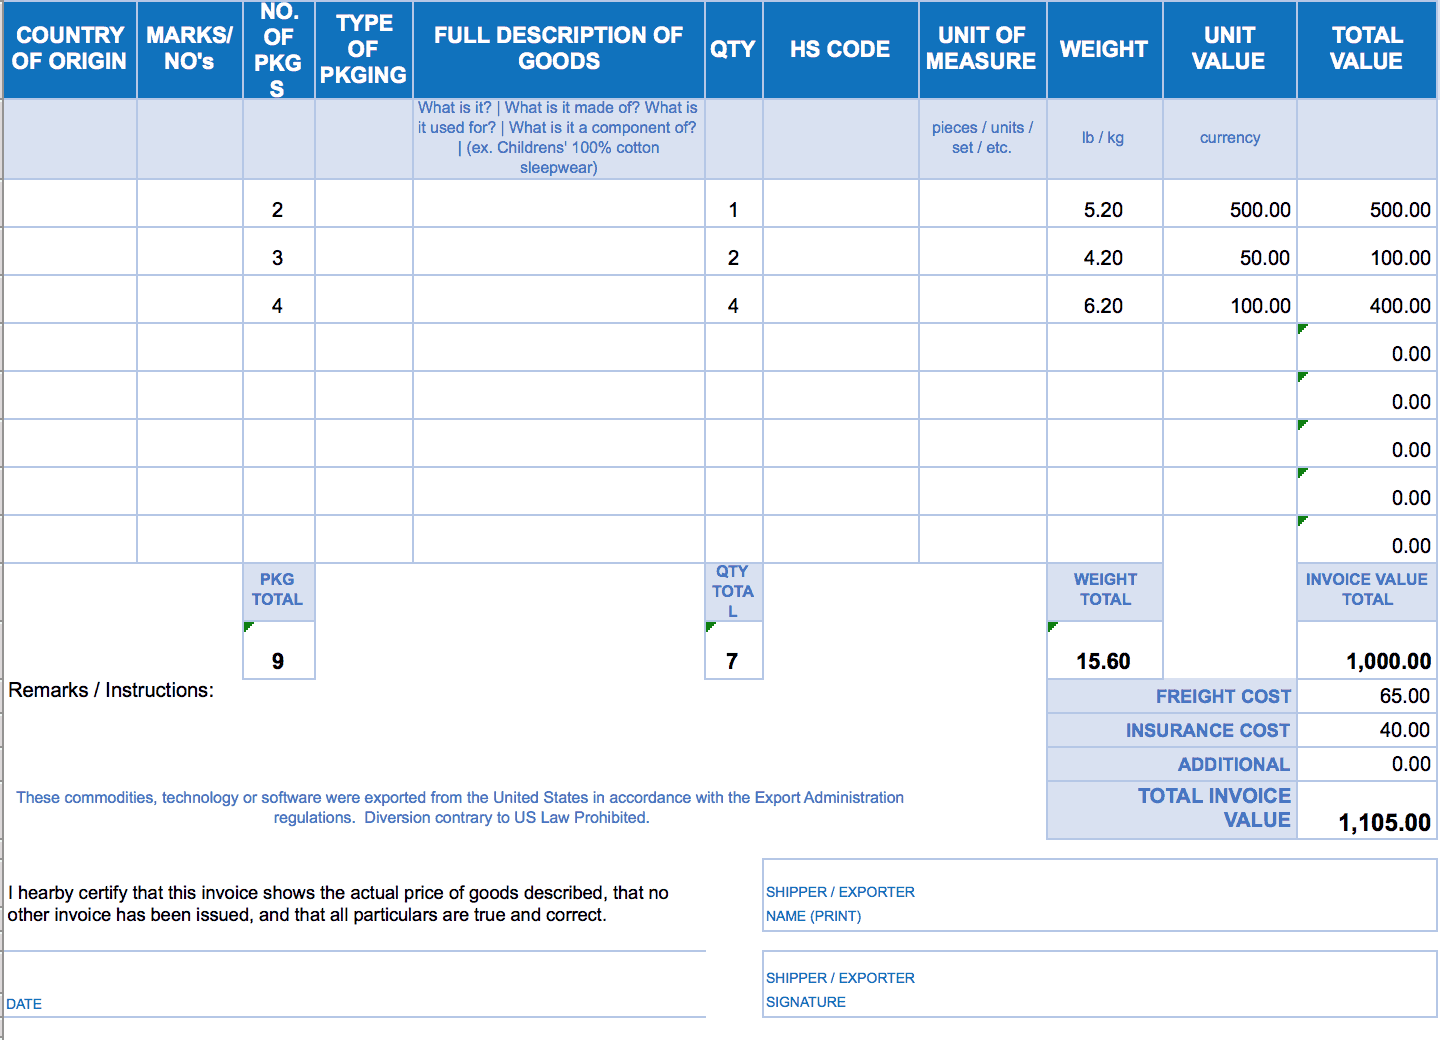 Free Excel Invoice Templates - Smartsheet Throughout Invoice Tracking Spreadsheet Template